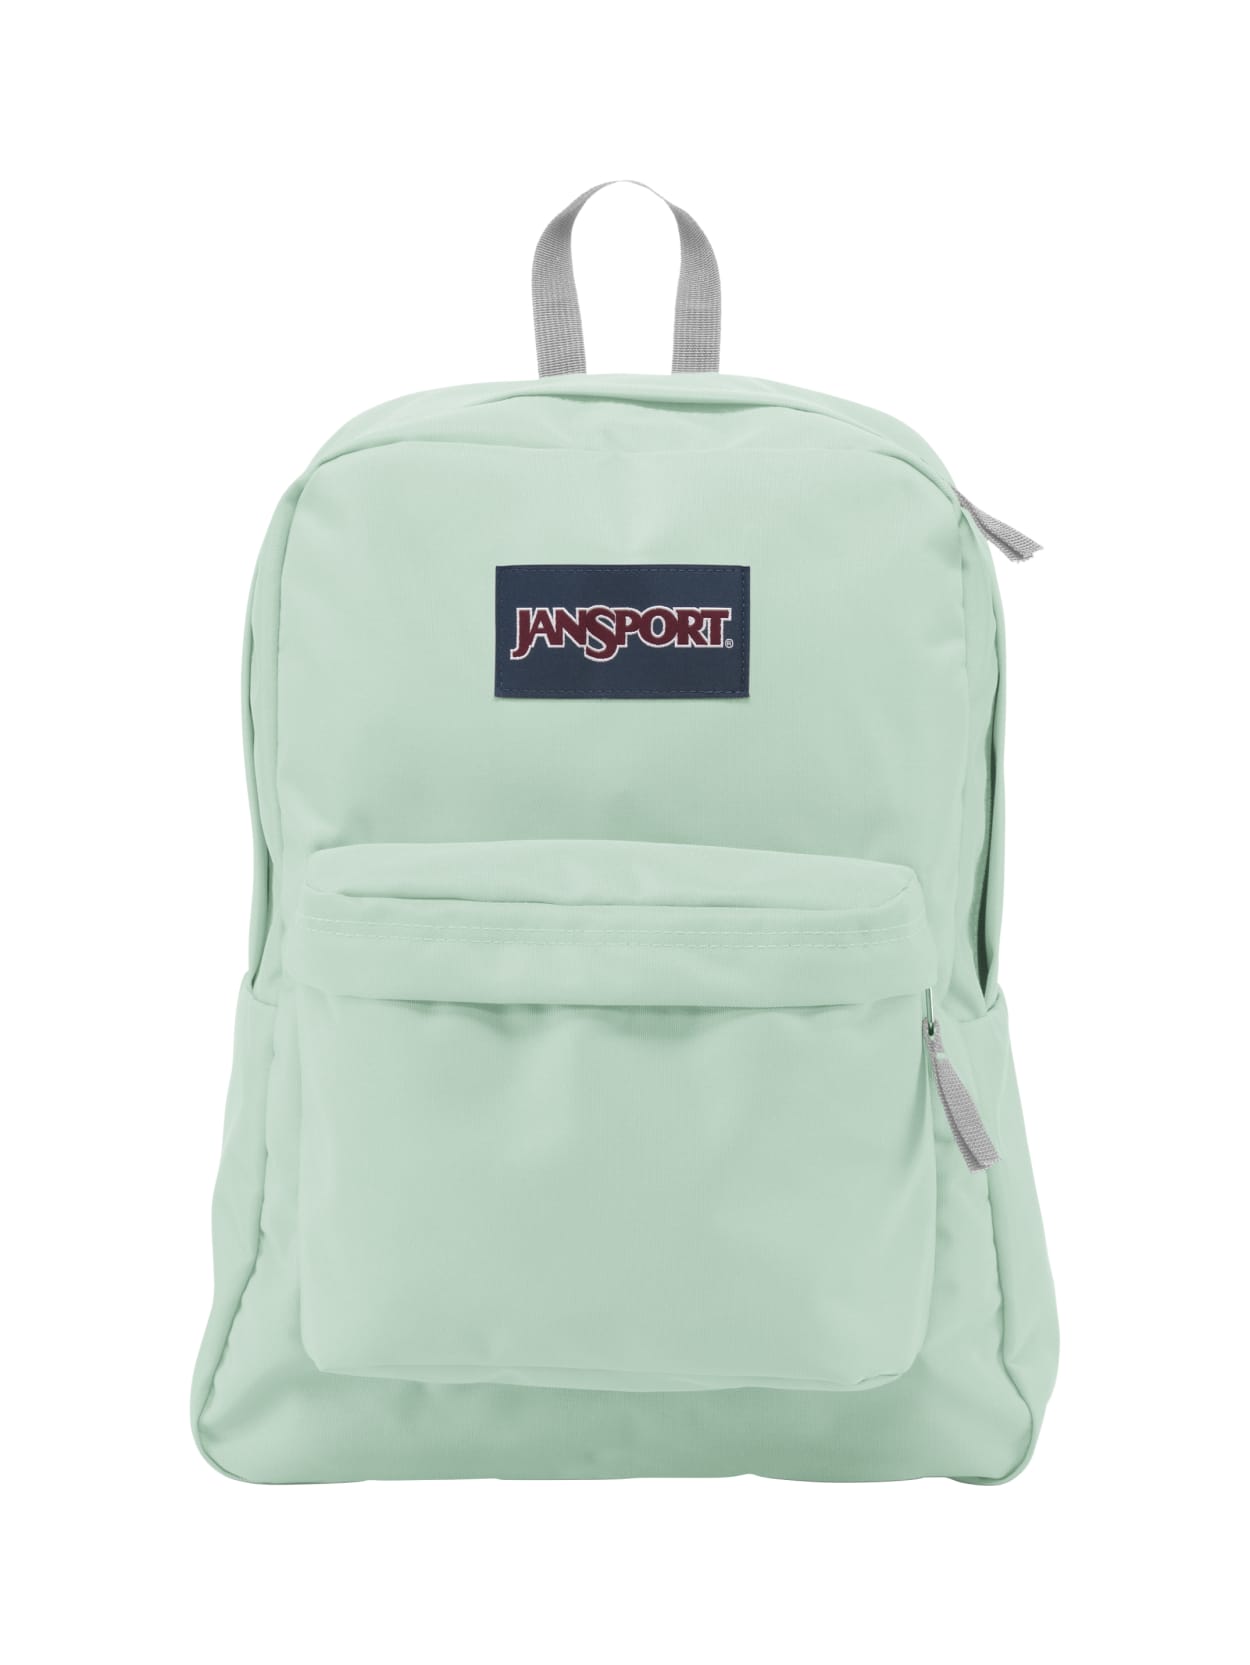 jansport backpack turquoise